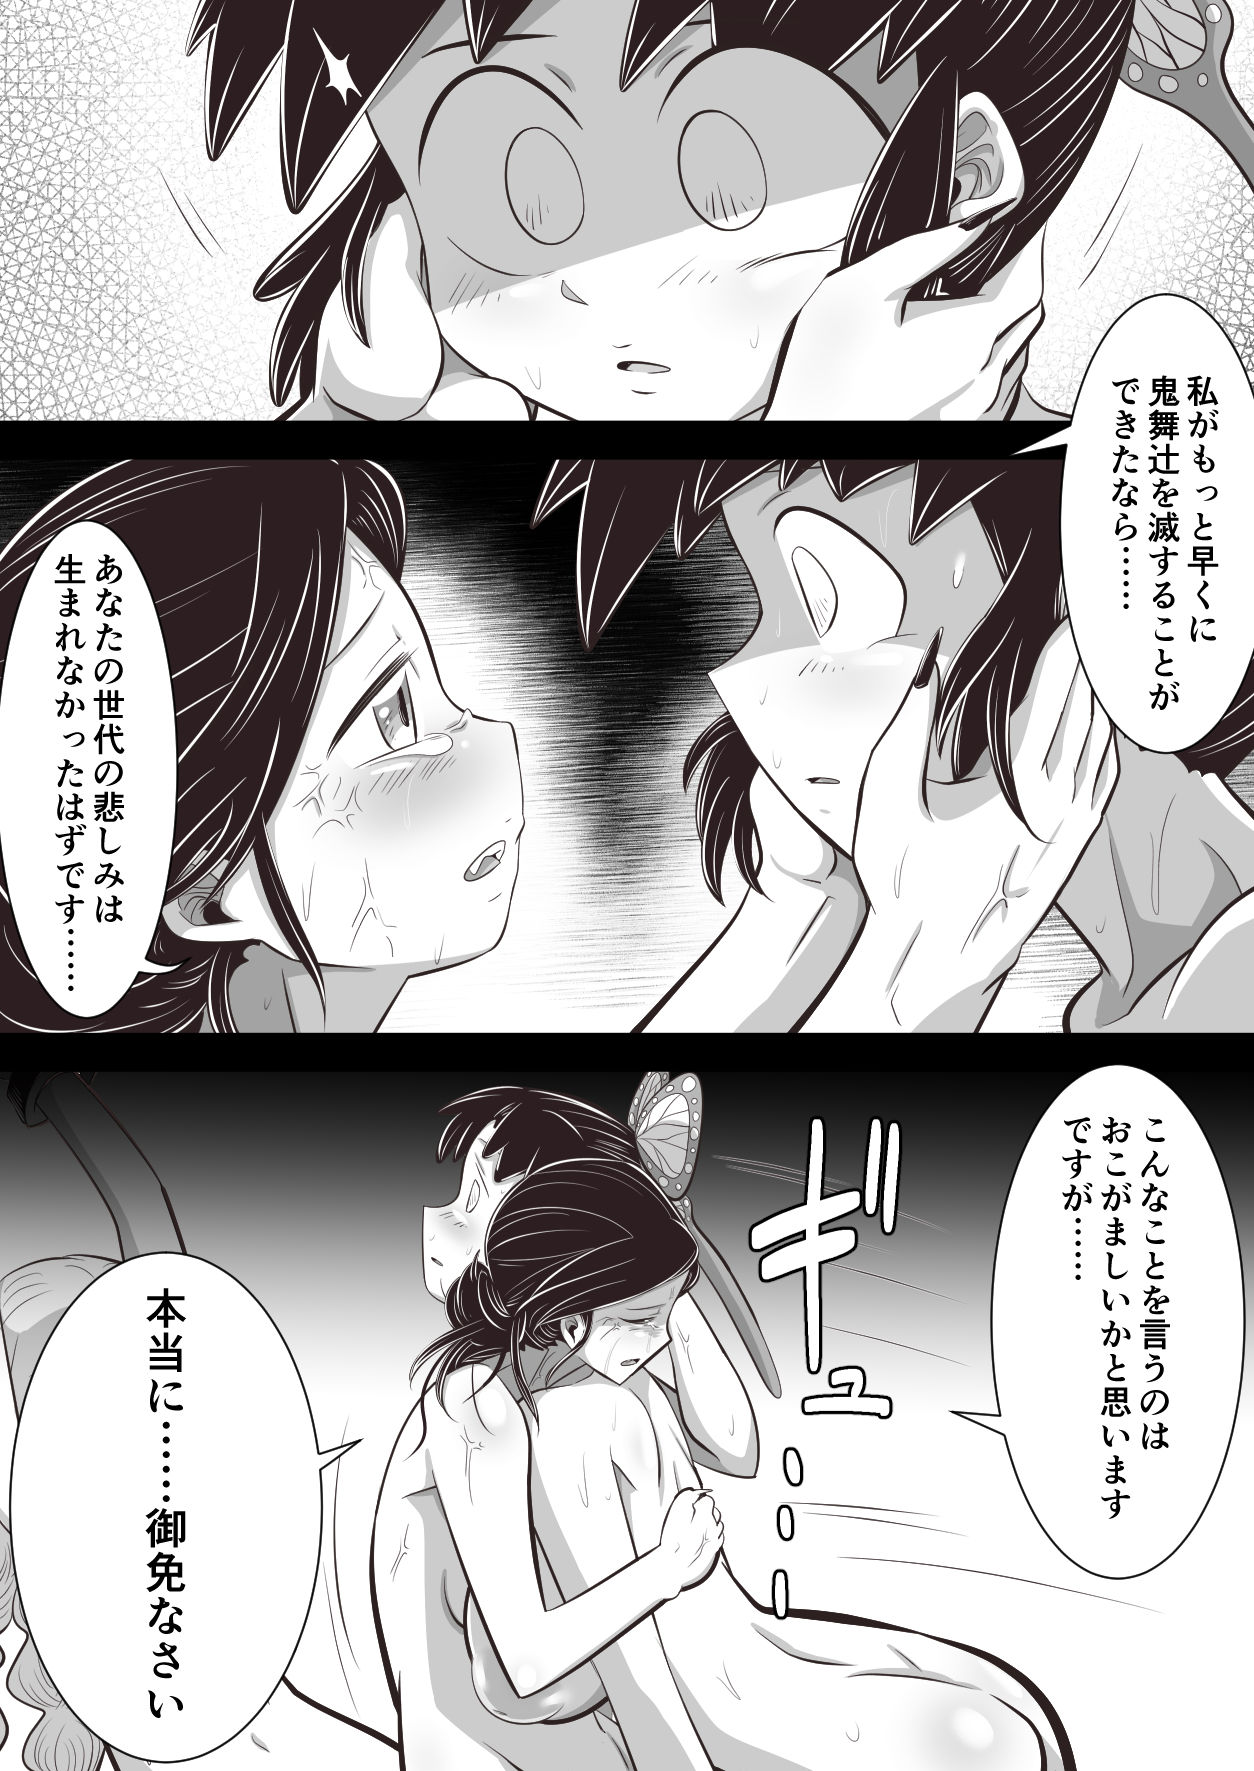 [Nightmare] Shino x Tama~ Love Blooms from Torture? page 23 full